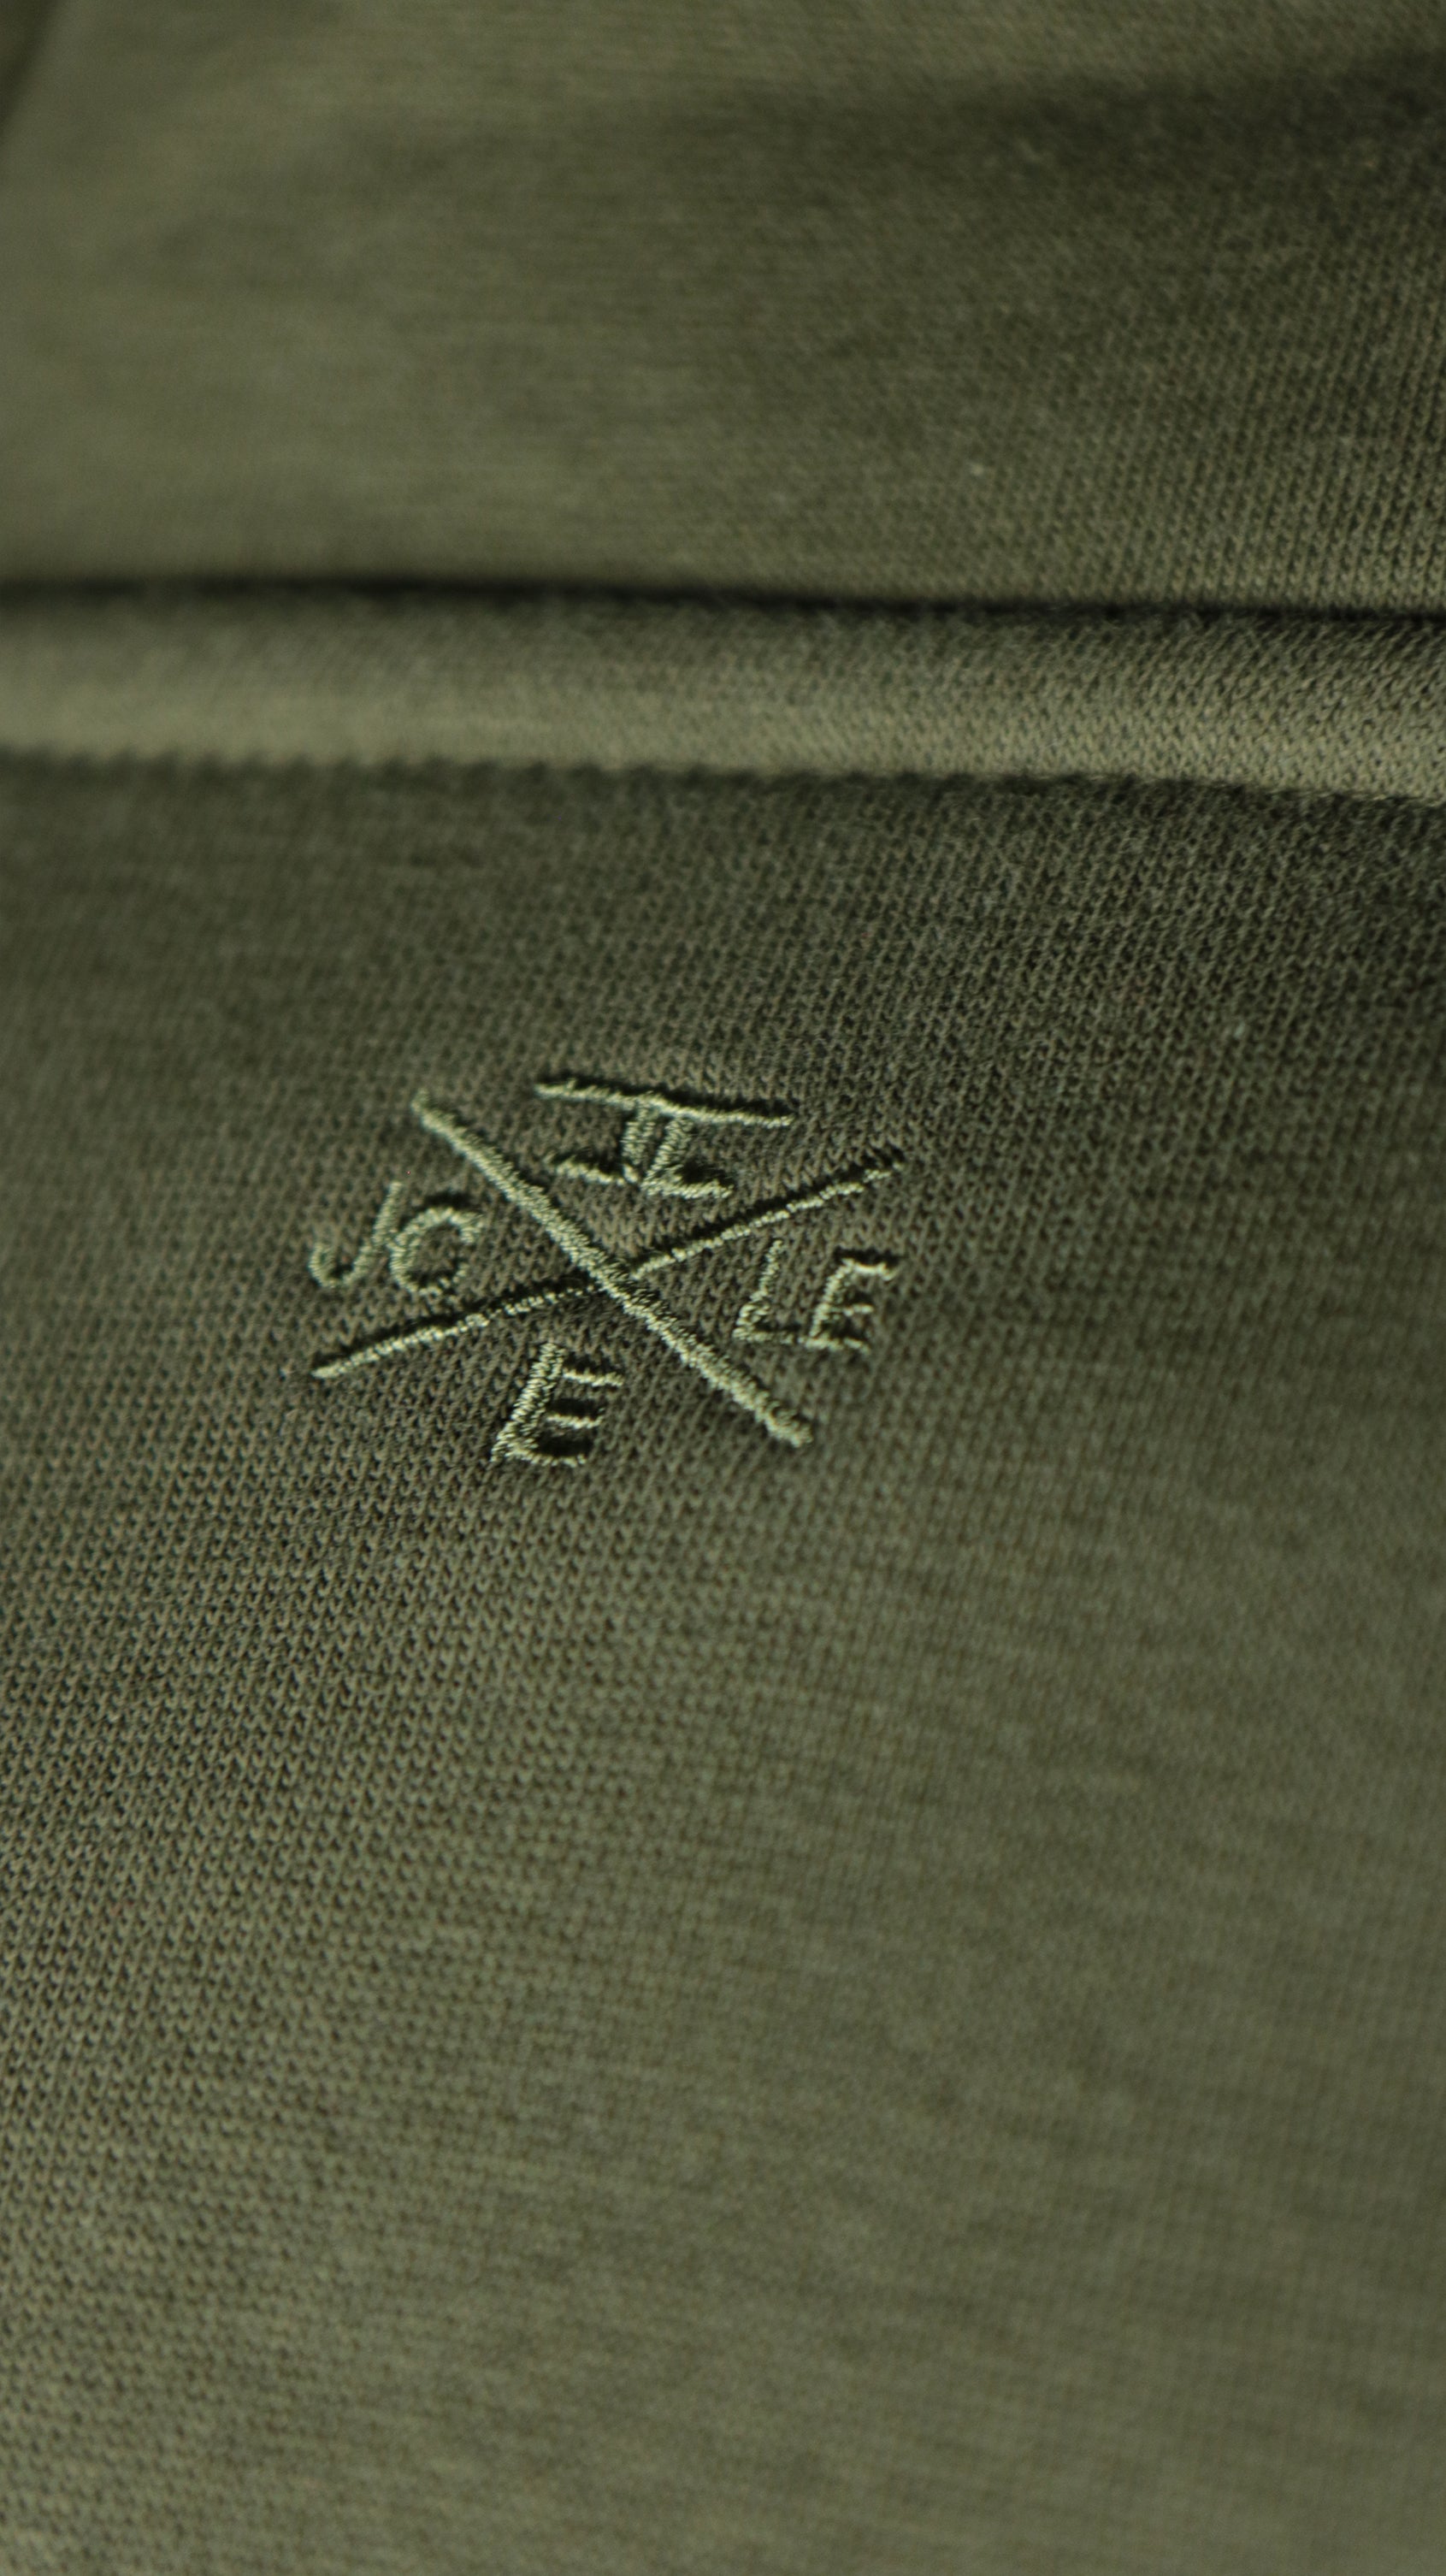 The Jordan Craig logo on the back side of the olive military green pullover hoodie.